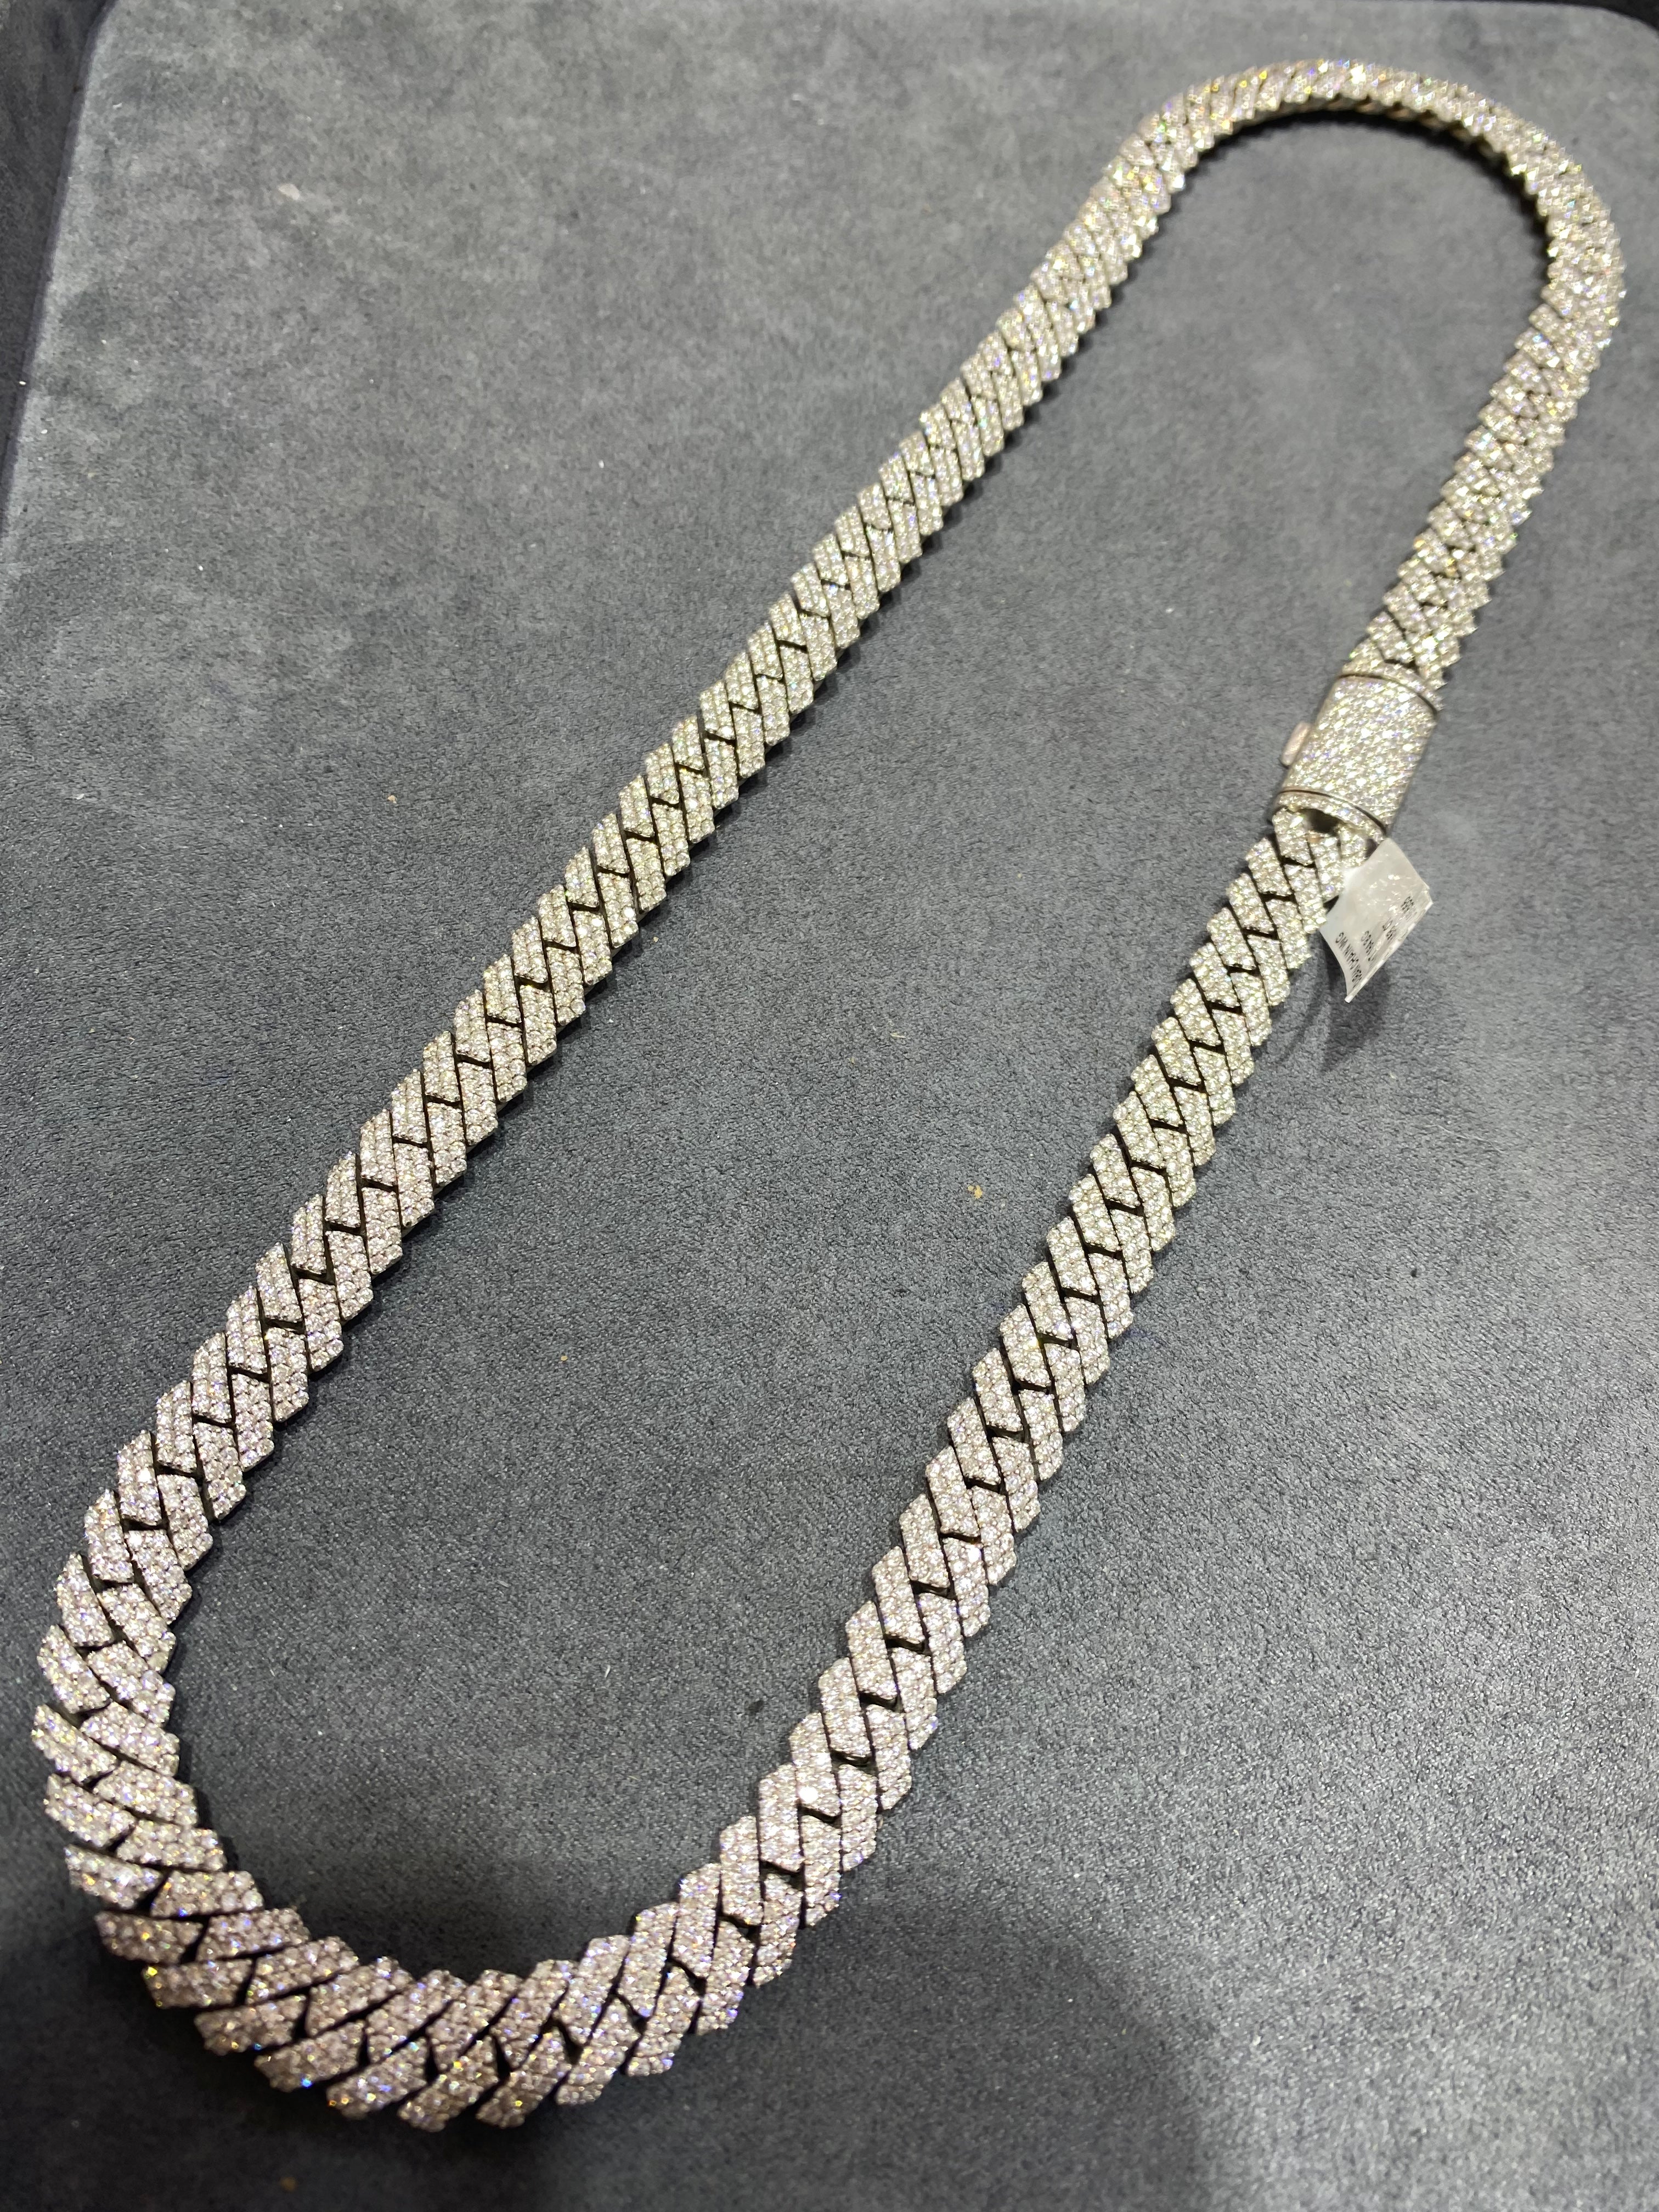 New ICED 14k WHITE GOLD MIAMI CUBAN NECKLACE Vs1 24.cts.t.w. NATURAL DIAMONDS online at renee de paris jewelry